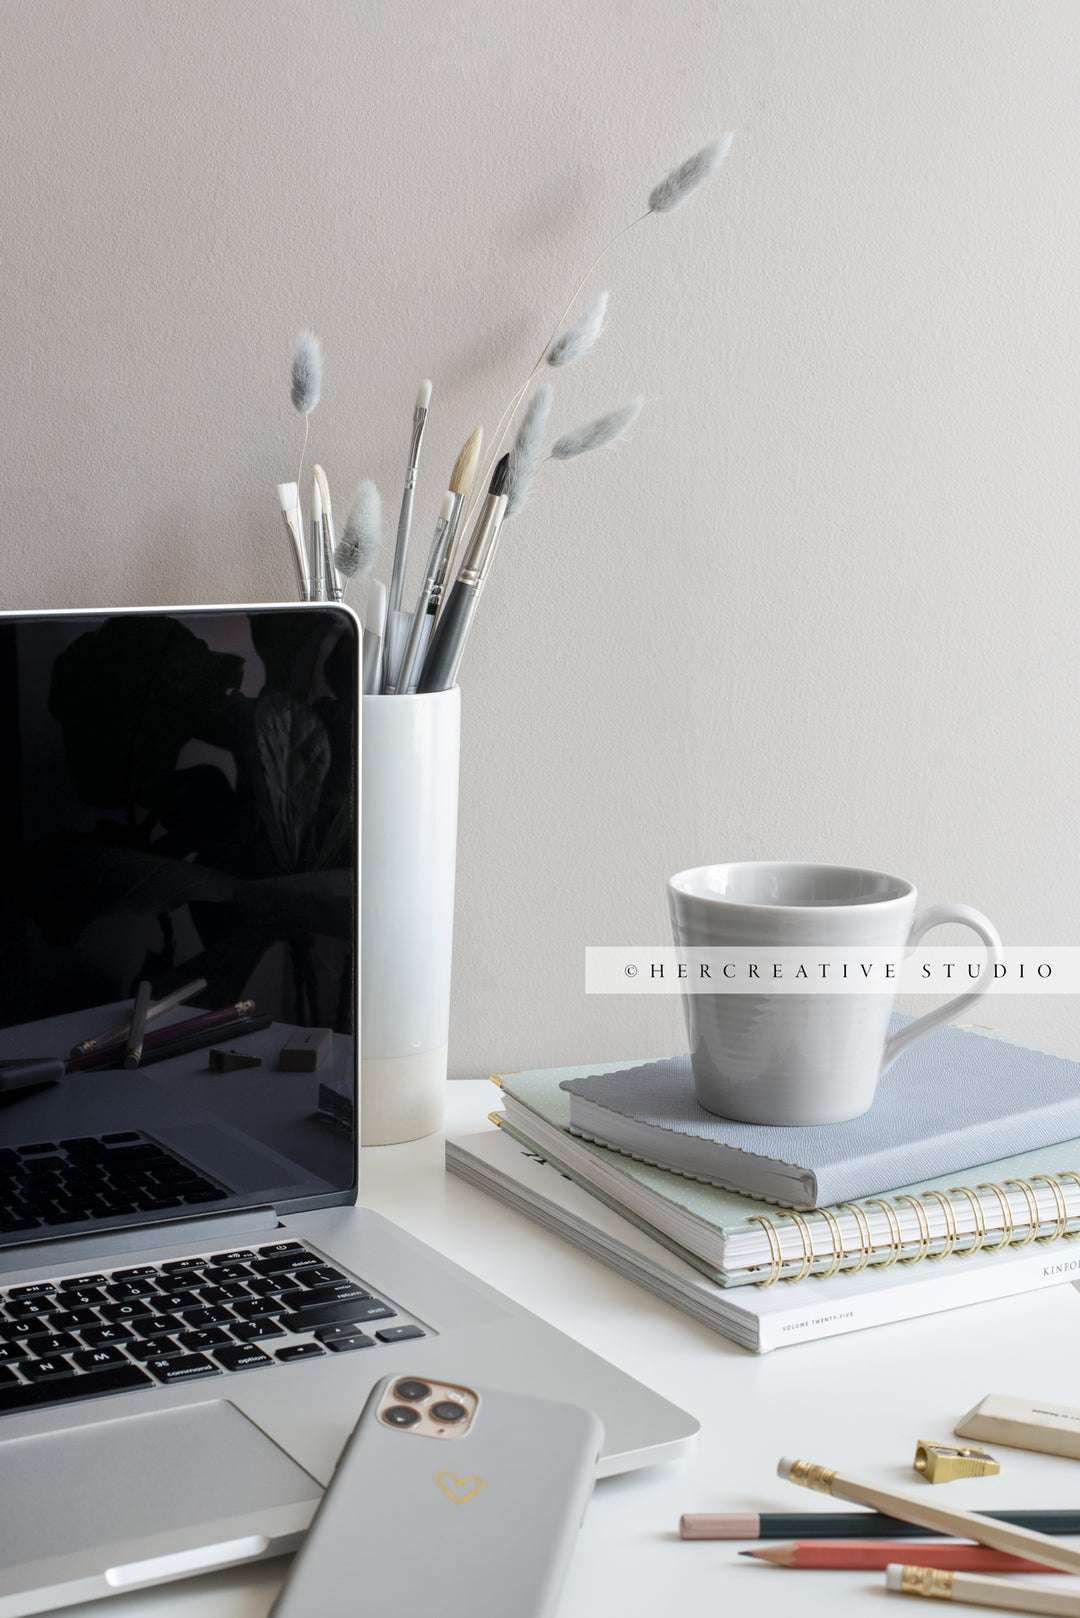 Laptop, Coffee and Paintbrushes on Grey Workspace. Stock Image